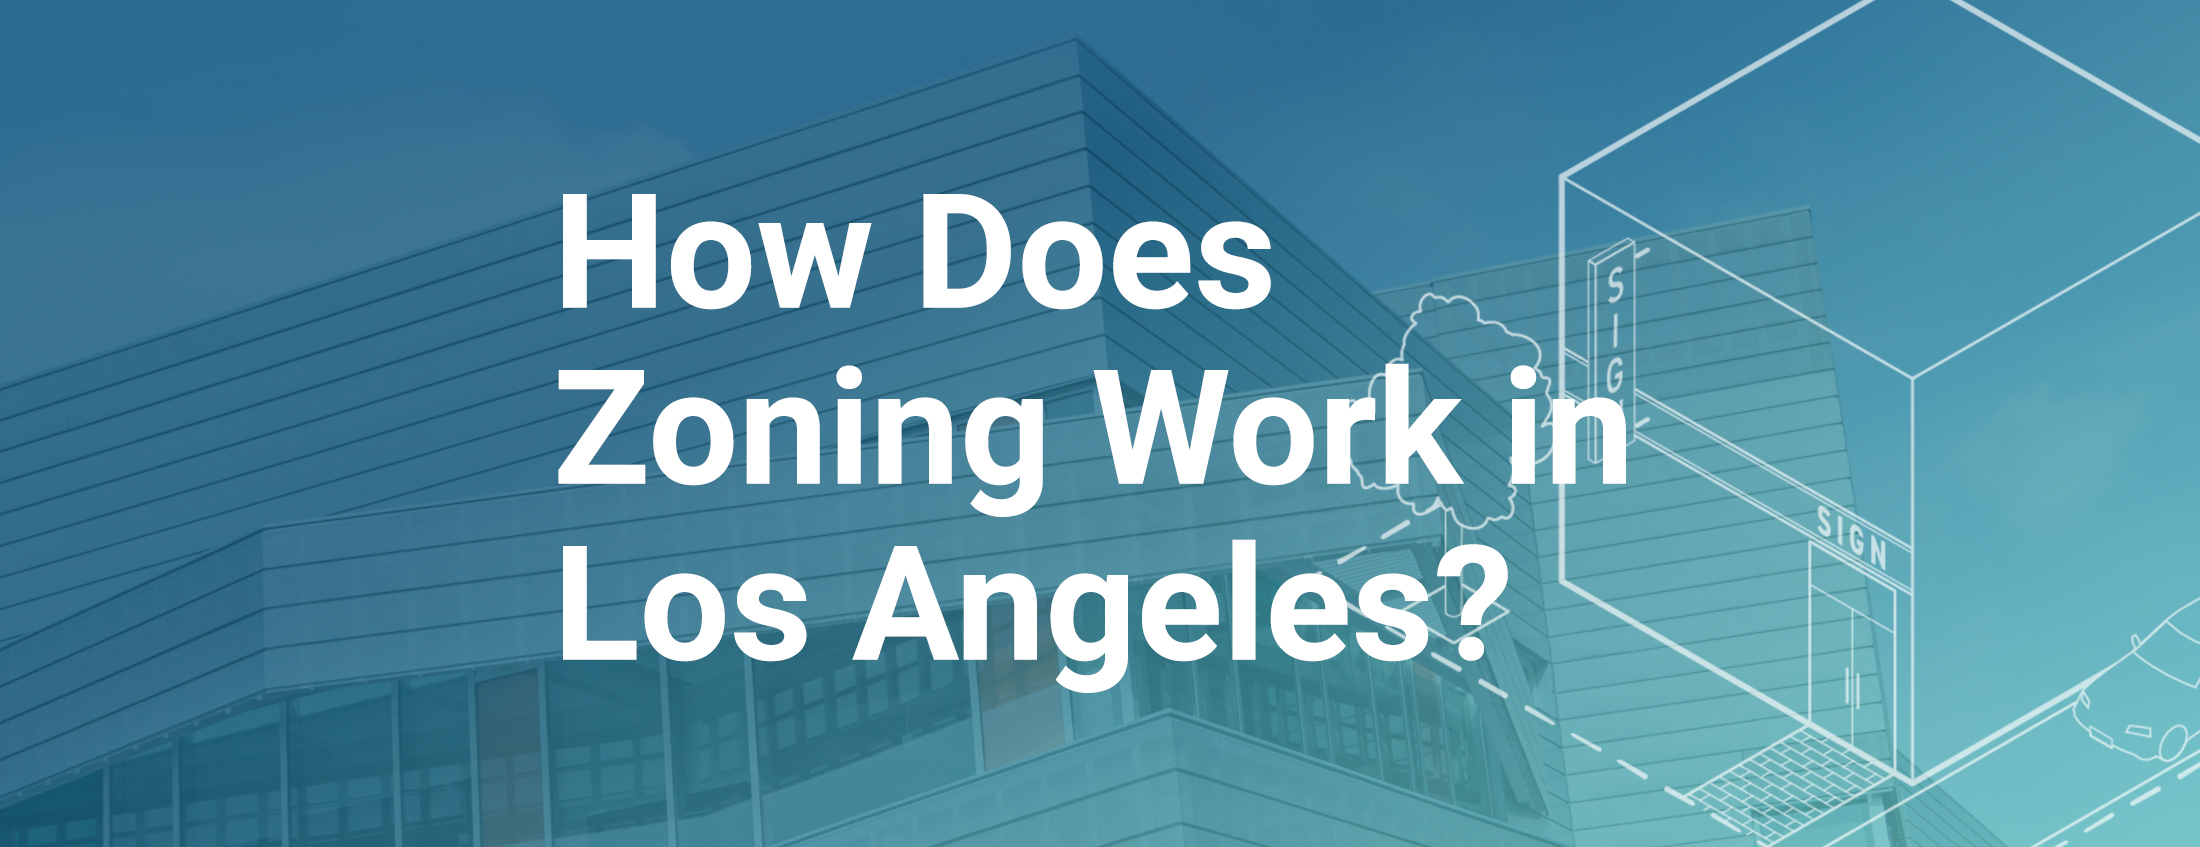 Zoning in Los Angeles